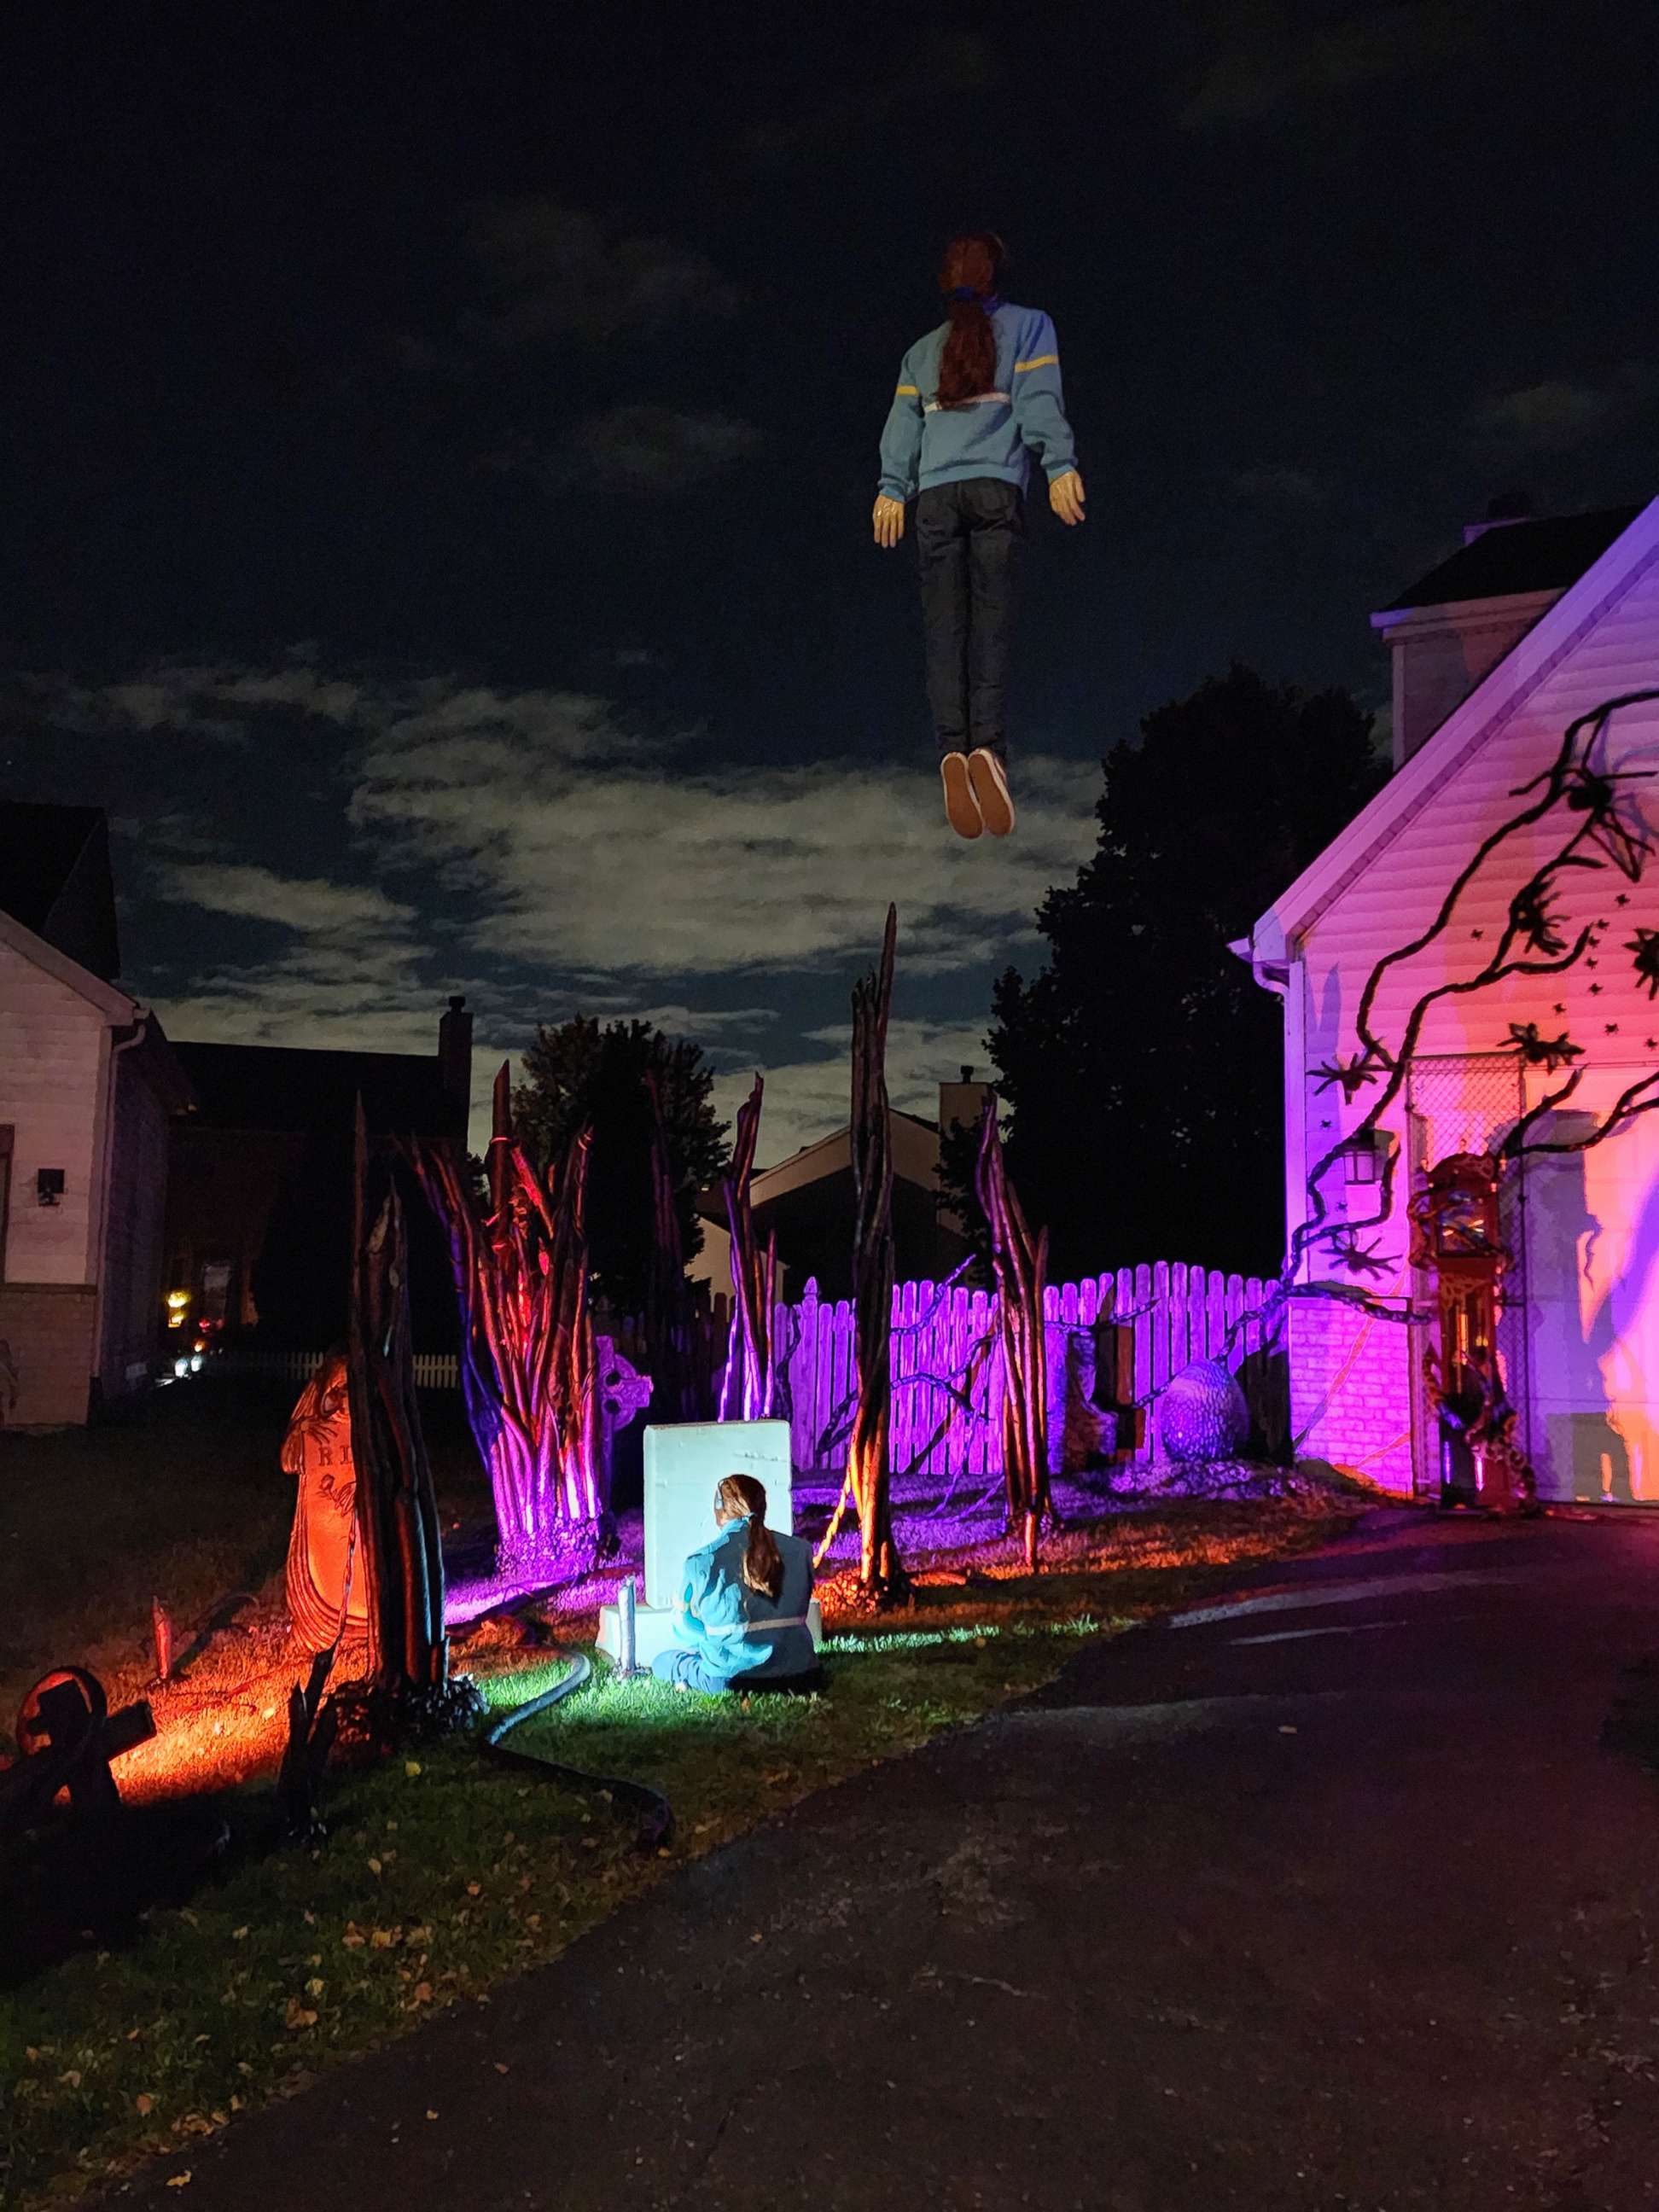 PHOTO: David and Aubrey Appel's Halloween decorations this year include a floating Max character from the hit "Stranger Things" series.